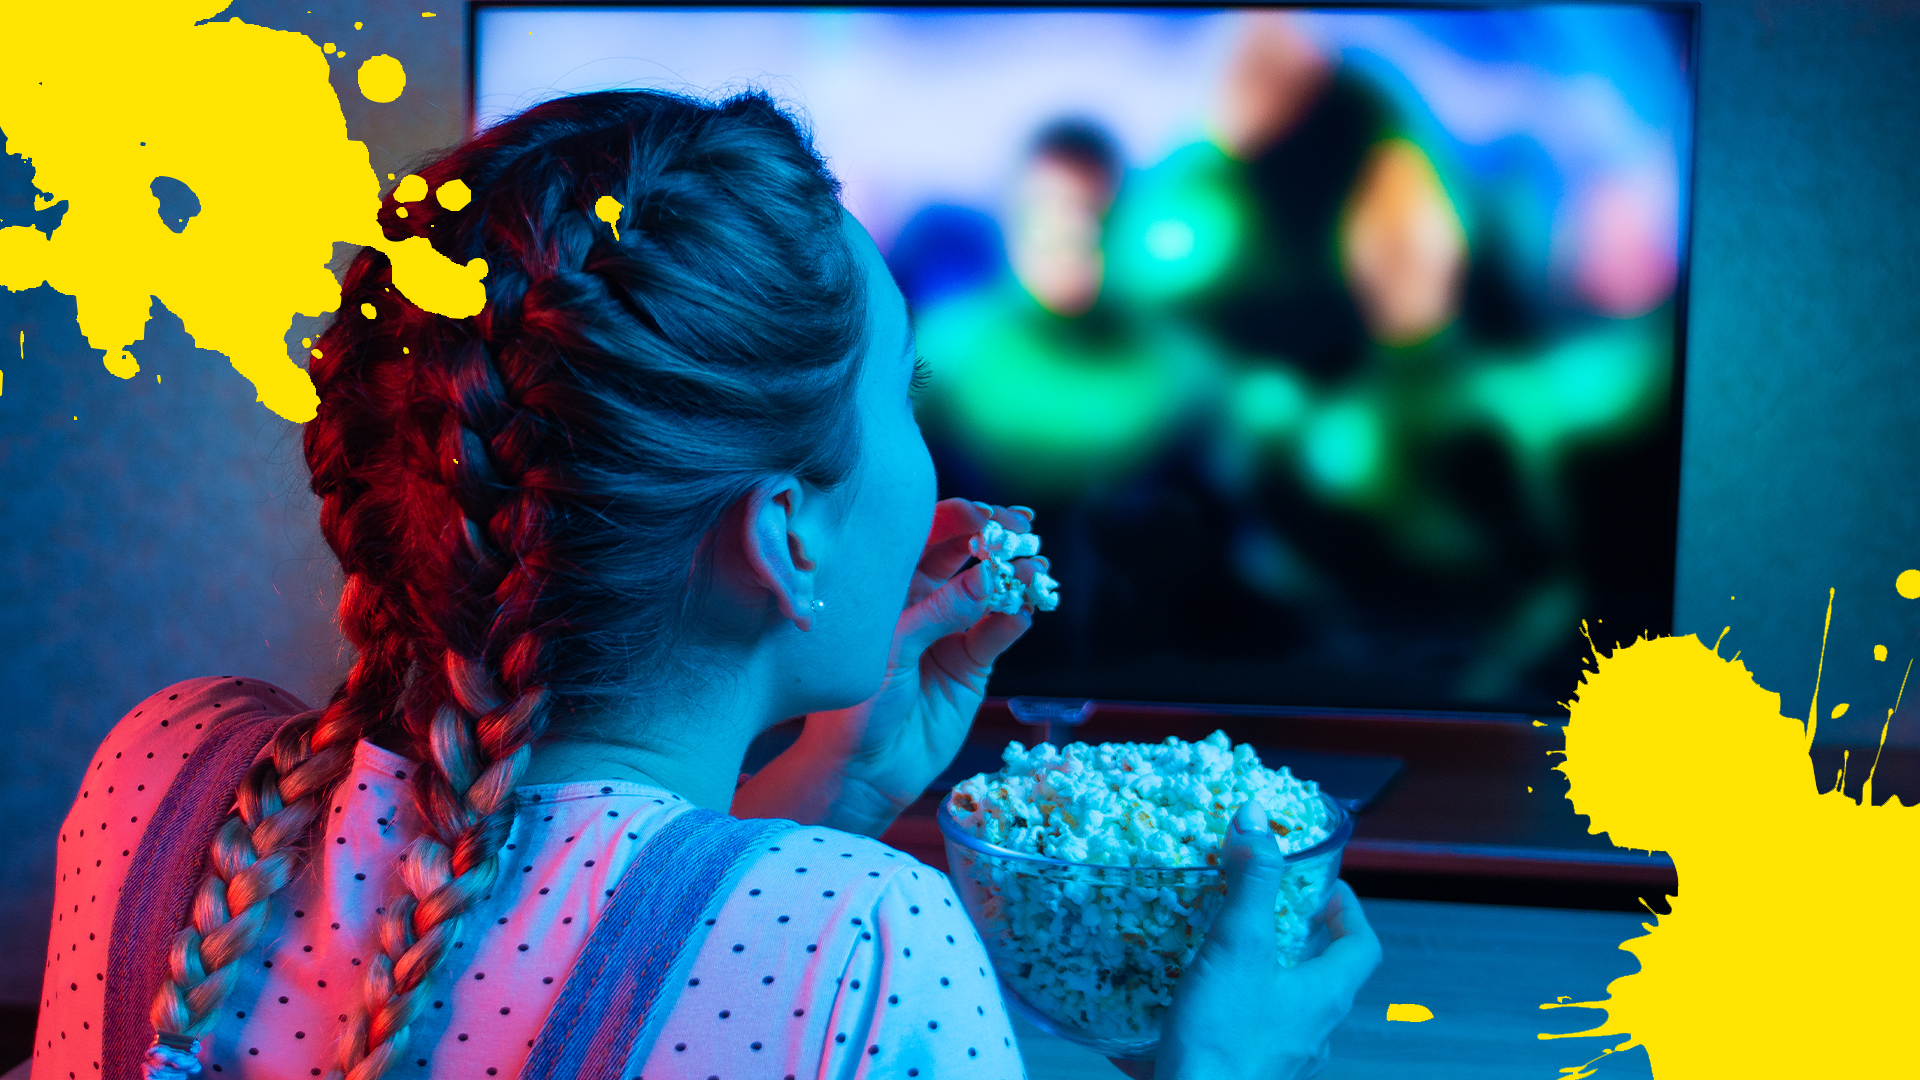 Girl eating popcorn and watching TV with yellow splats